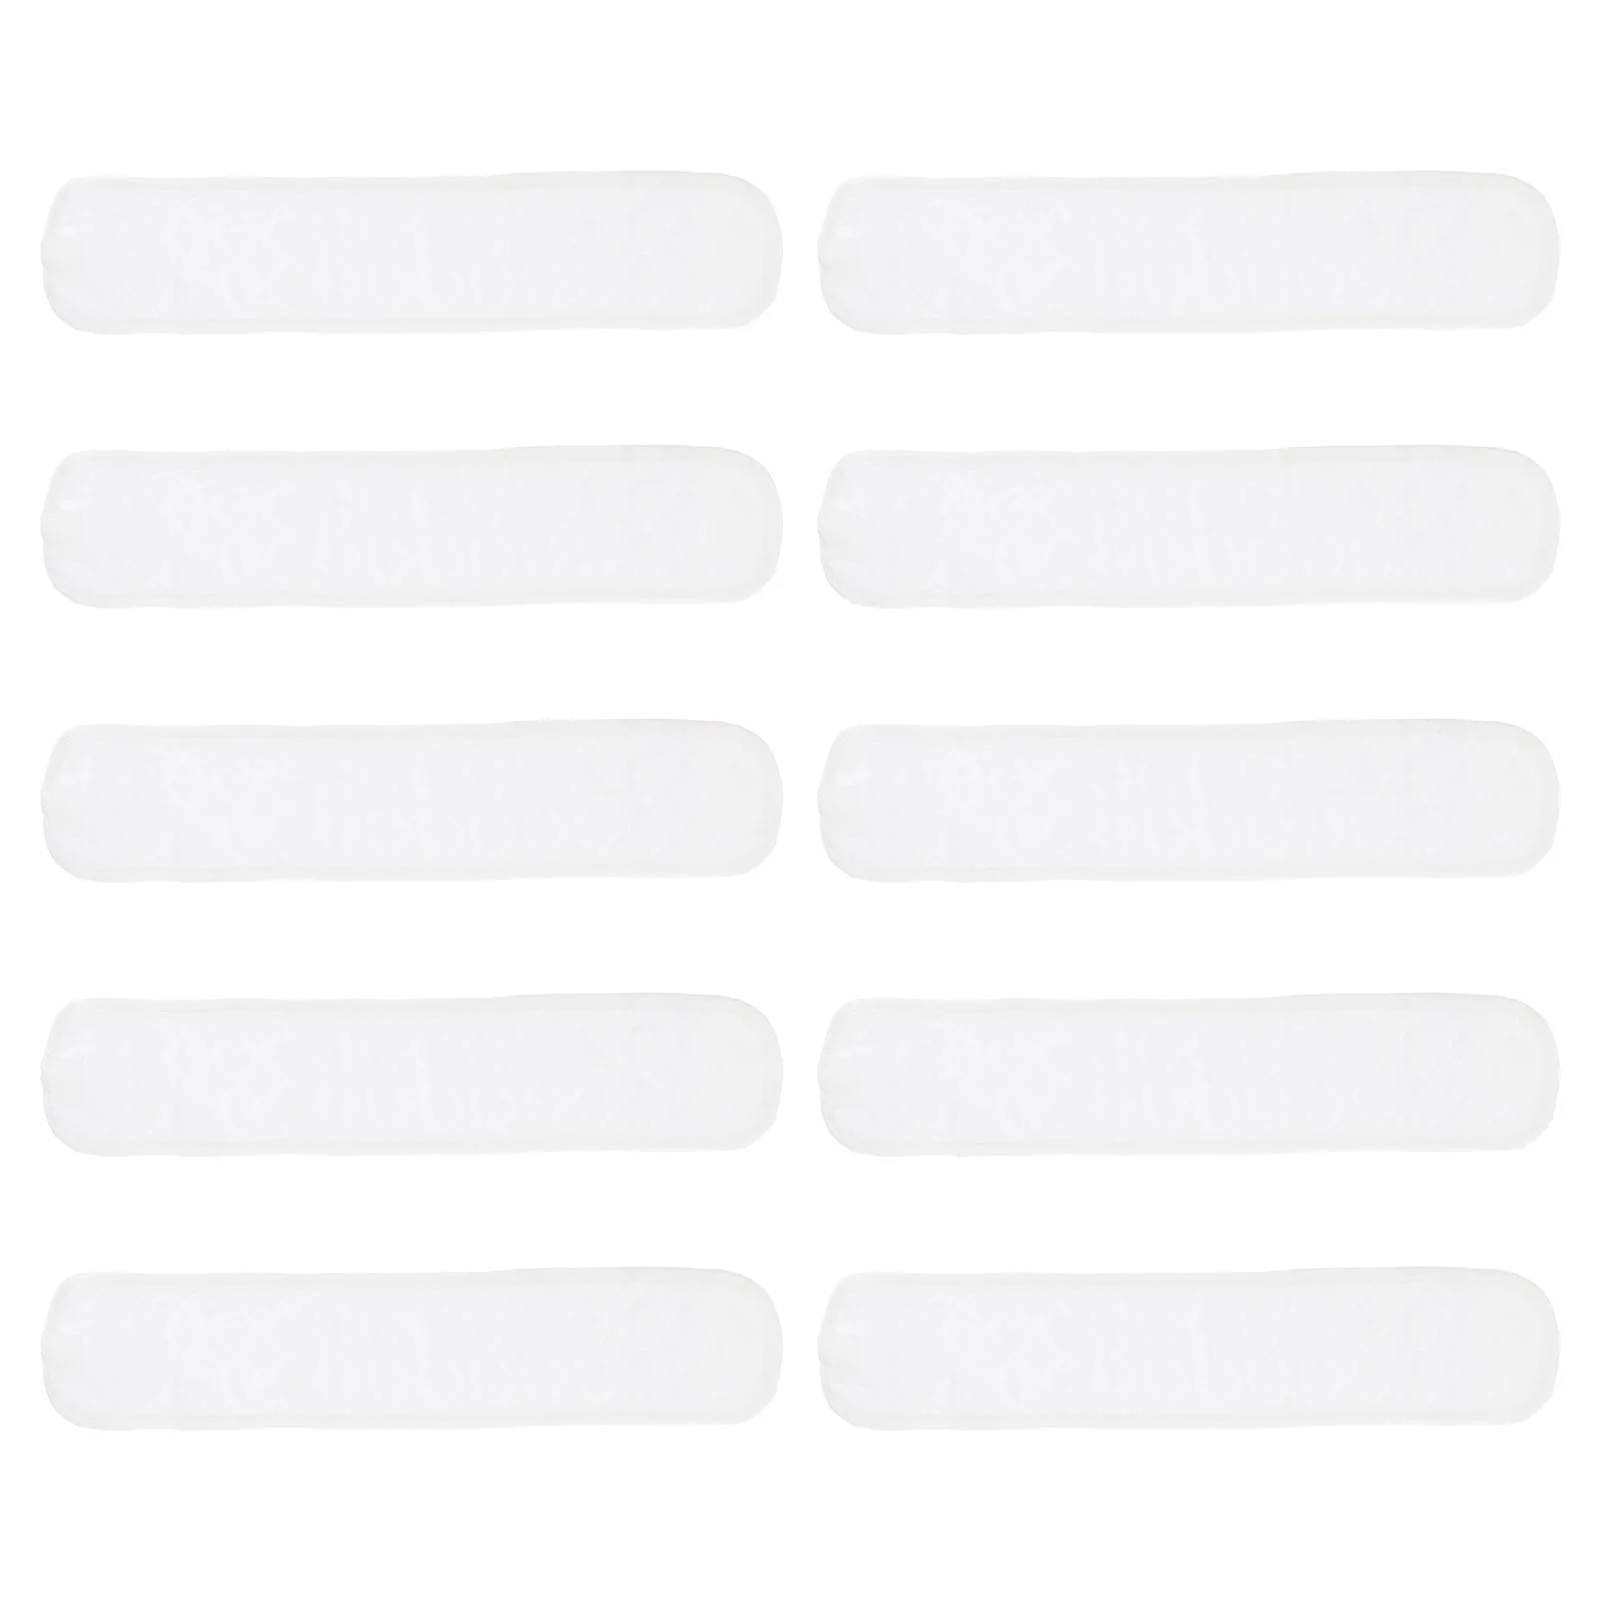 10Pcs Belly Band Infant Umbilical Cord Belt Hernia Care Cotton Navel Truss Support Newborn Essential for 0- 12 Months 3pcs infant umbilical cord care belly navel belt belly protection baby newborn soft breathable white cotton umbilical cord care